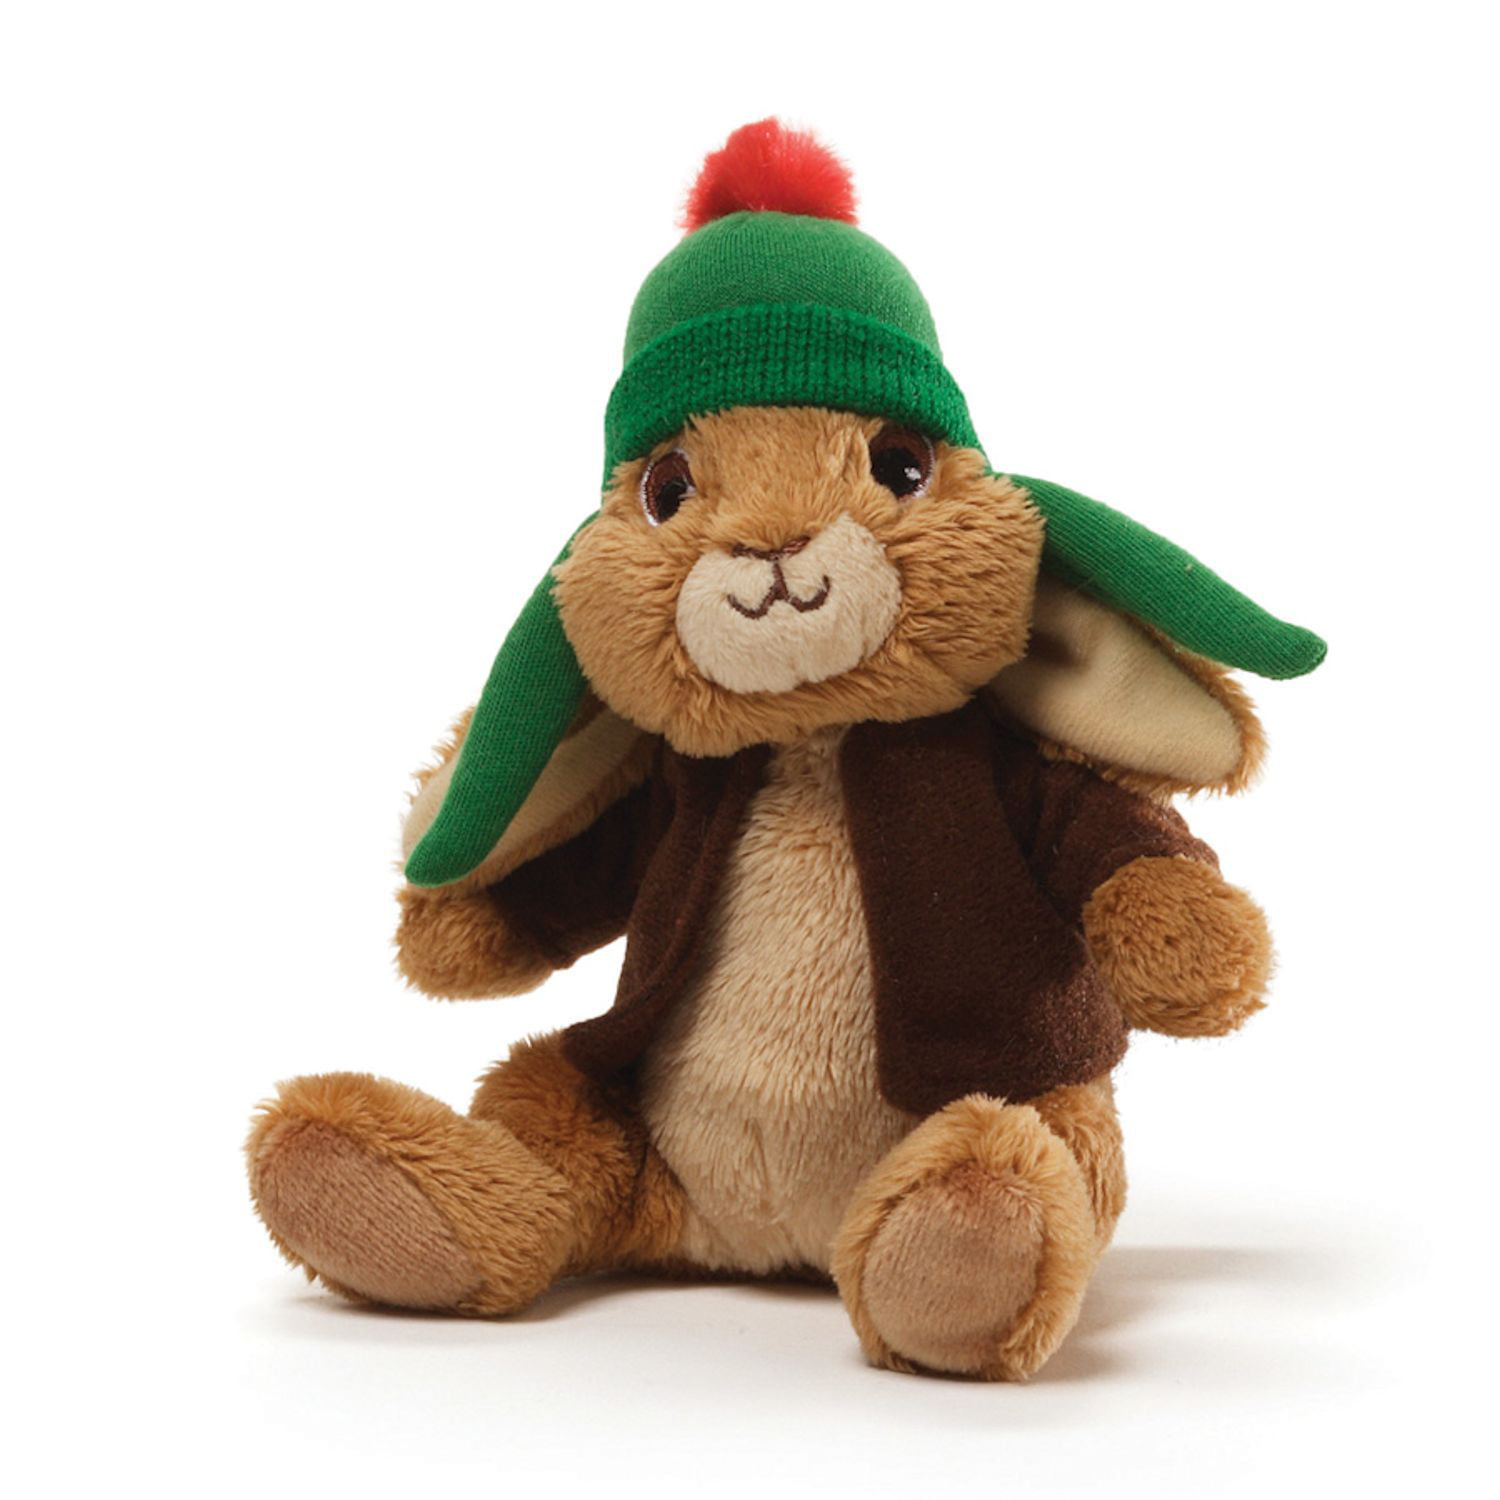 GUND for Nickelodeon Peter Rabbit Large 24" Plush REDUCED for sale online 